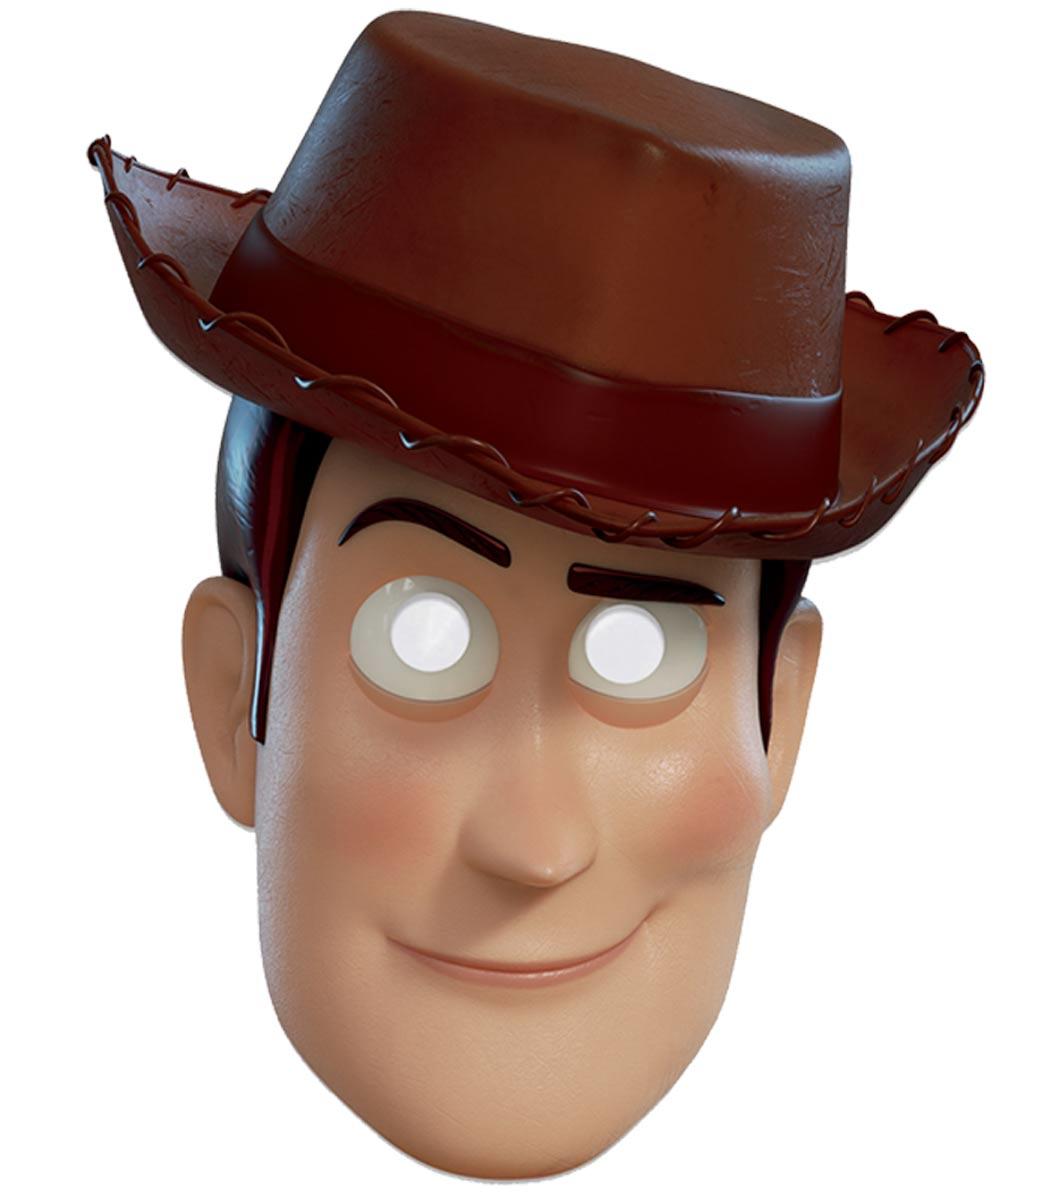 Woody Toy Story Face Mask by Mask-erade 300396 available here at Karnival Costumes online party shop